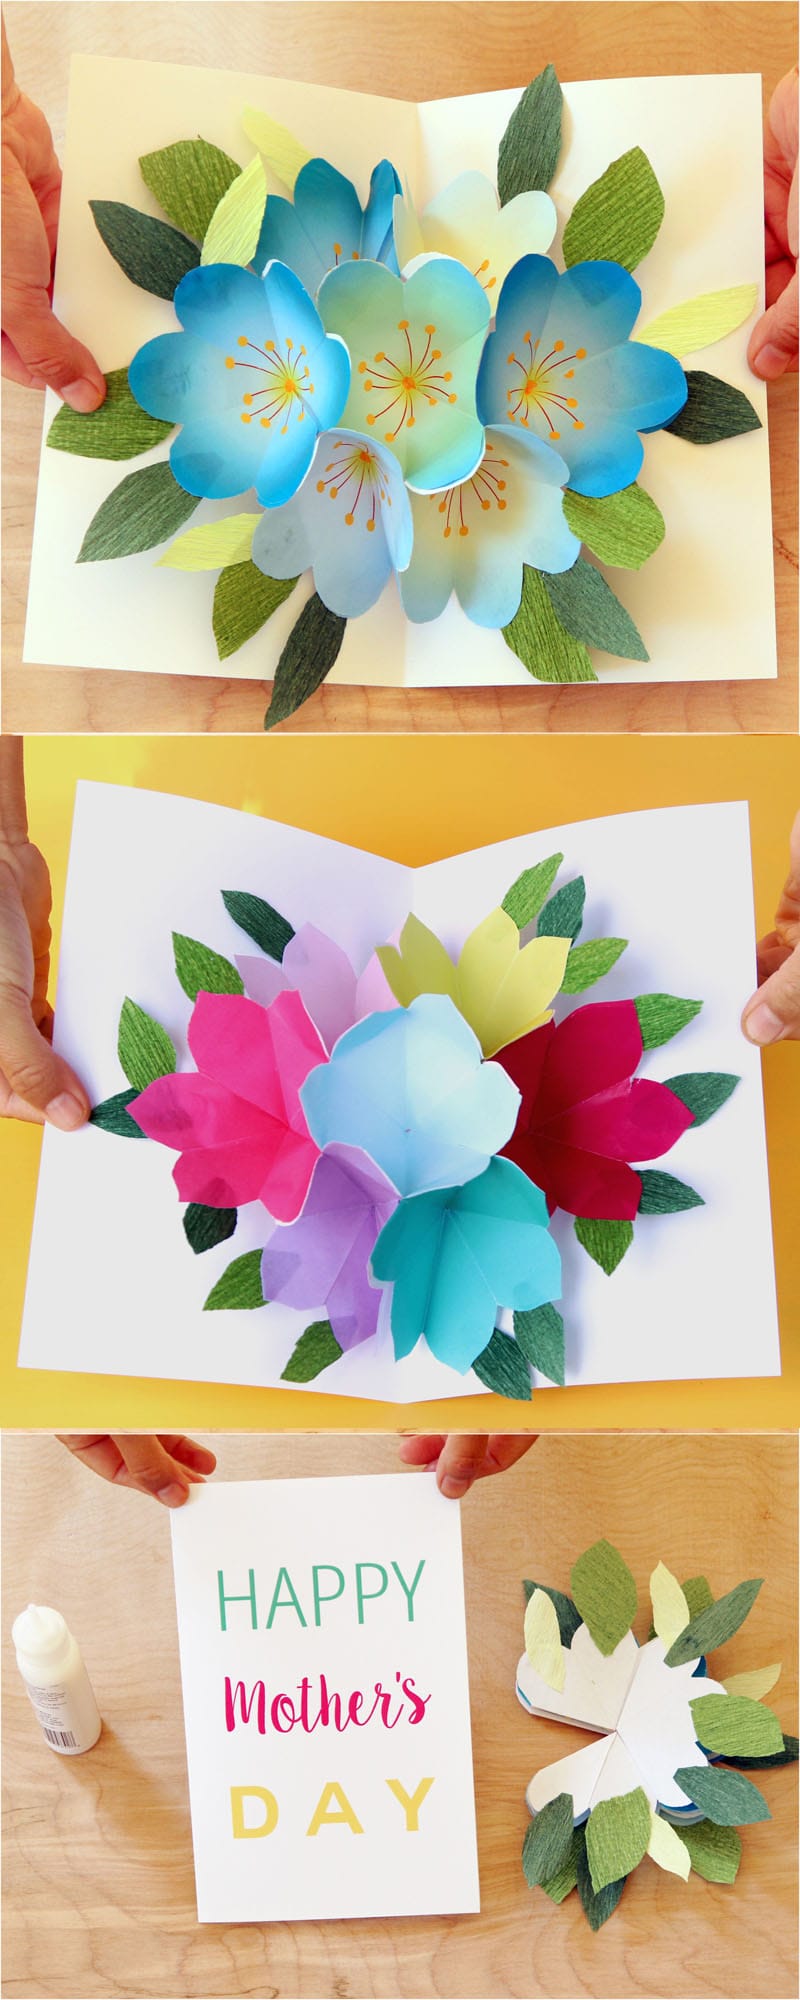 Make an Origami Bag for the Best Mom's Day Ever!